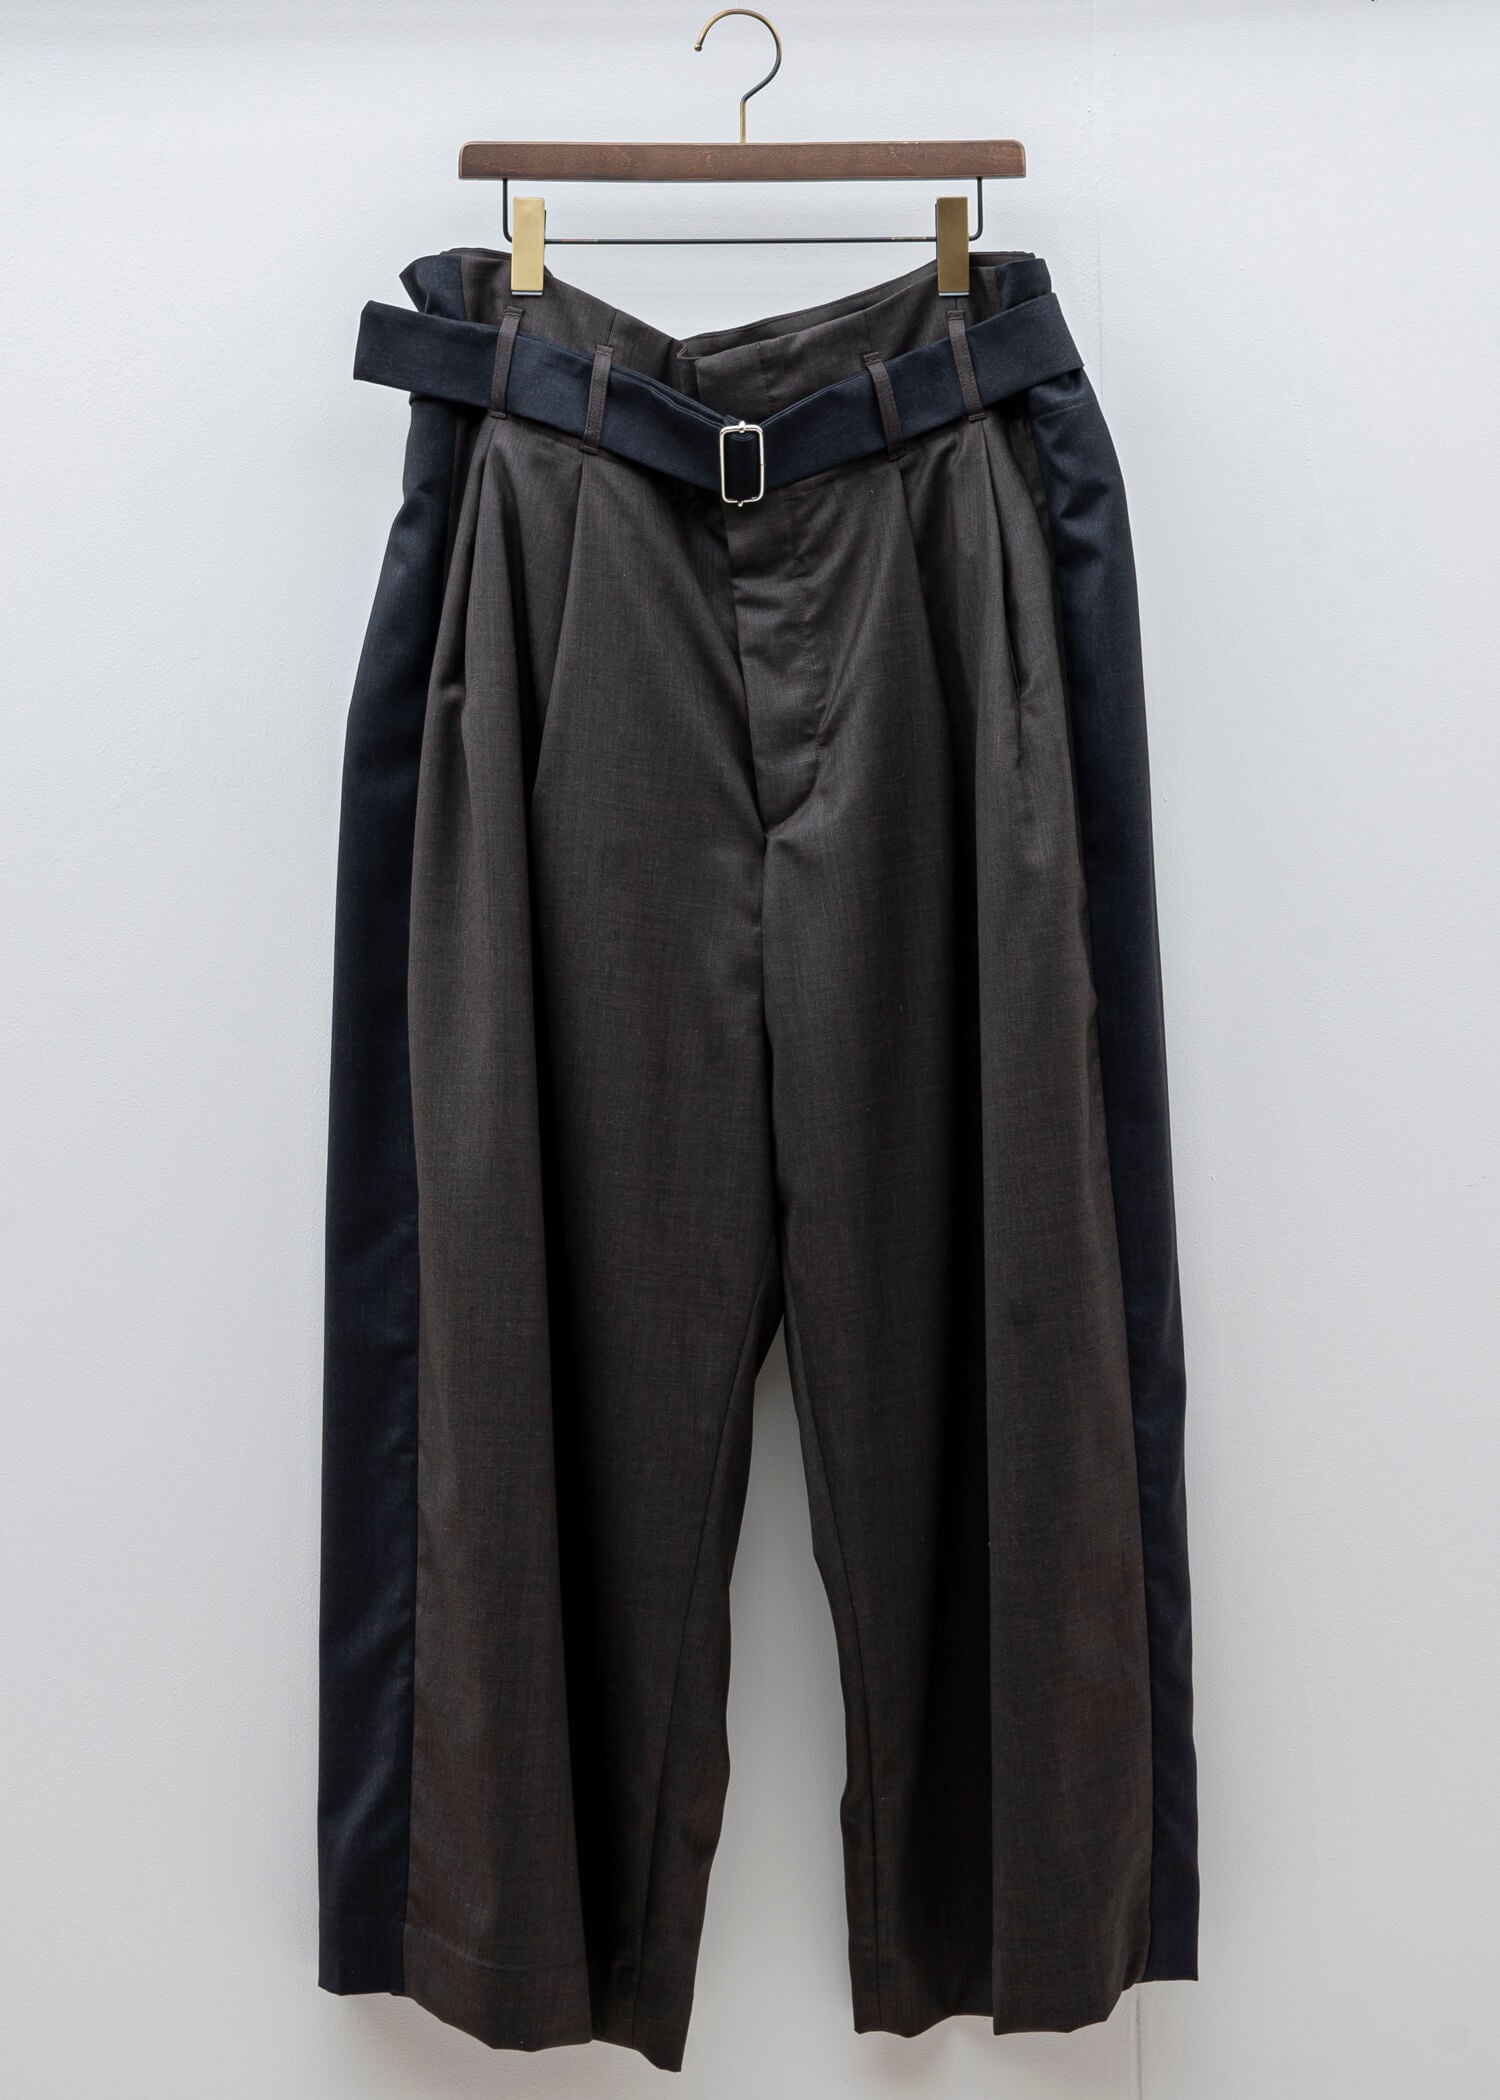 HED MAYNER / WIDE PLATED PANT / GRAY &amp; BROWN COOL WOOL